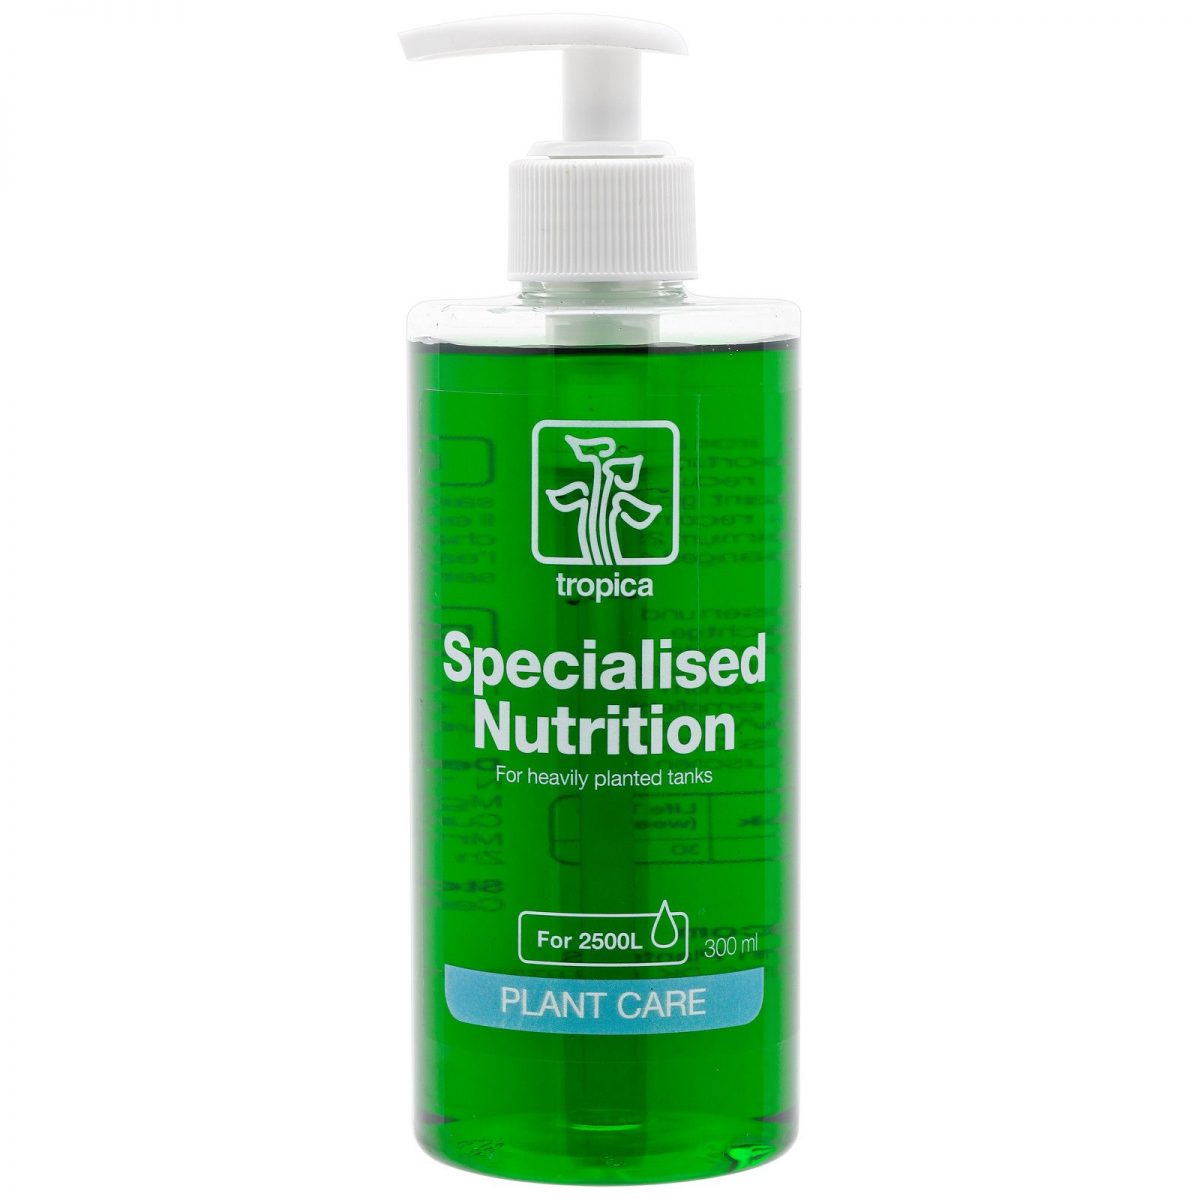 Tropica -Specialised Nutrition 300ml